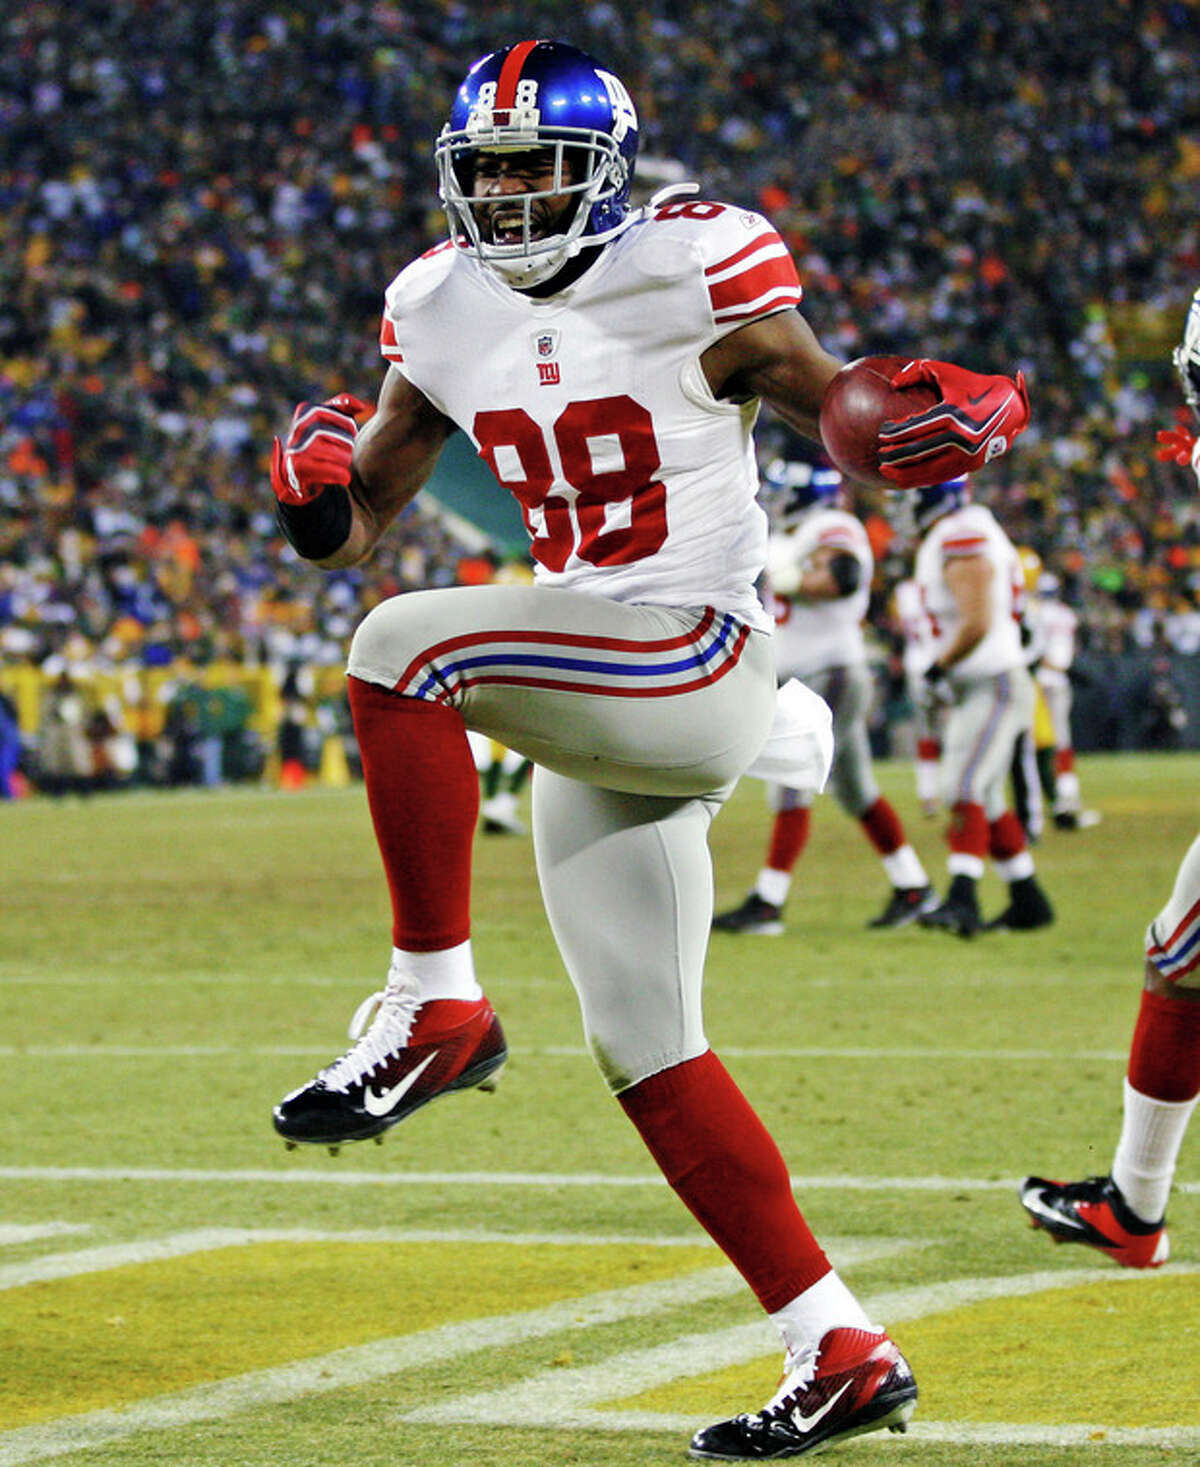 New York Giants wide receiver Hakeem Nicks (88) celebrates after catching a 37-yard touchdown pass during the first the first half of an NFL divisional playoff football game against the Green Bay Packers Sunday, Jan. 15, 2012, in Green Bay, Wis. The Giants won 37-20. (AP Photo/Mike Roemer)